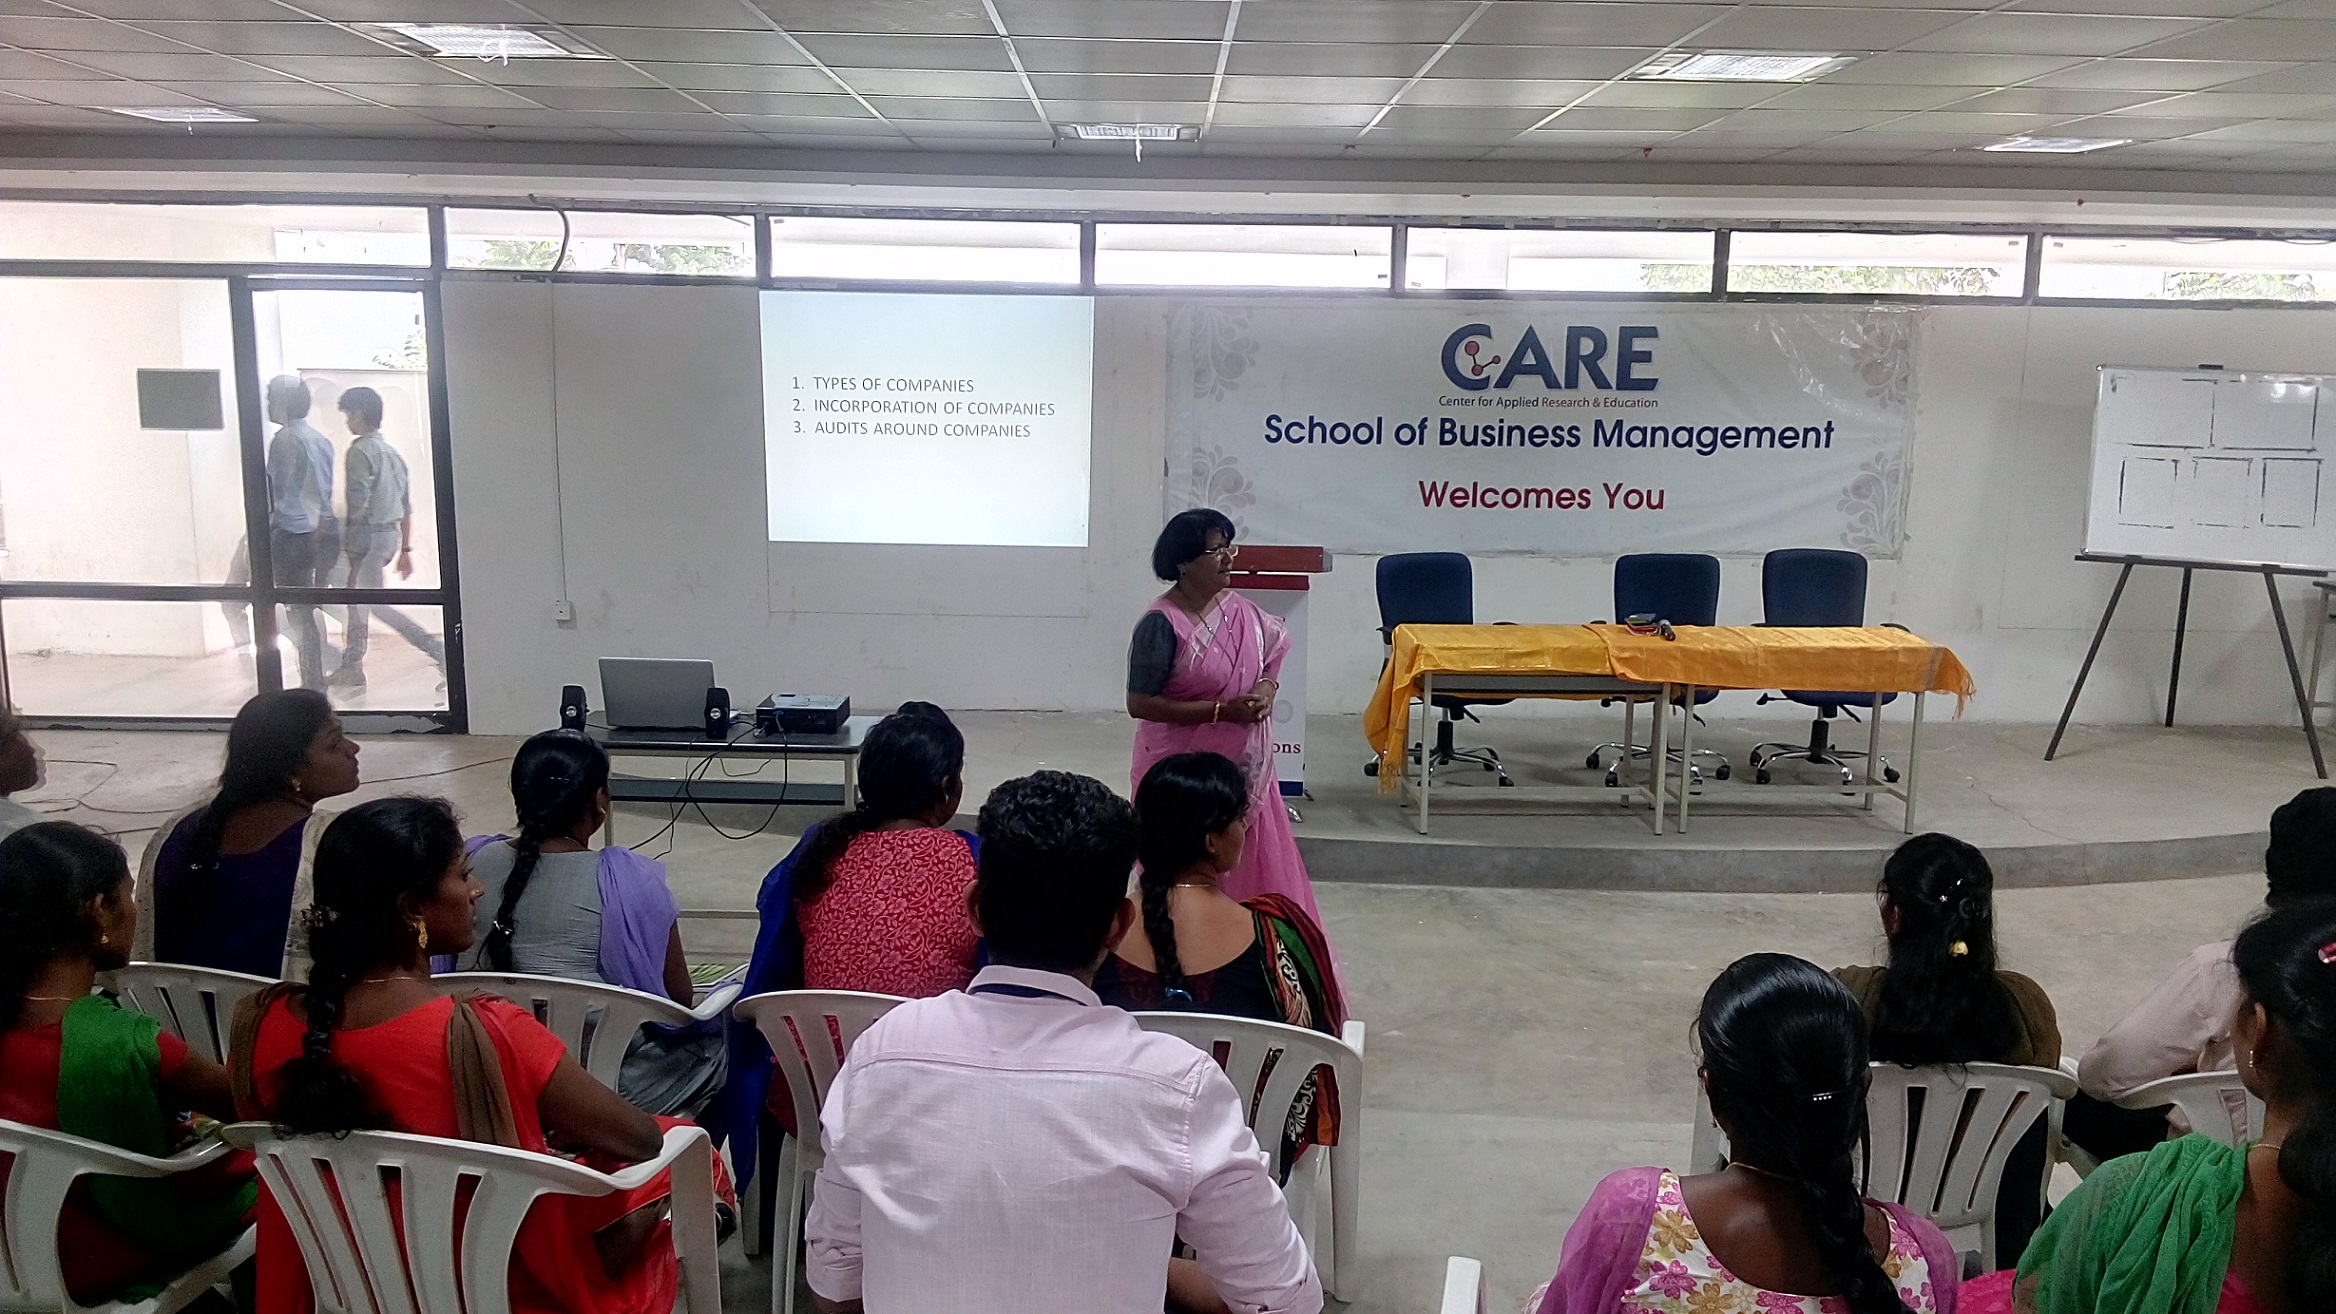 Legal Aspects of Business – Mrs. Jayanthi, Director, KMC